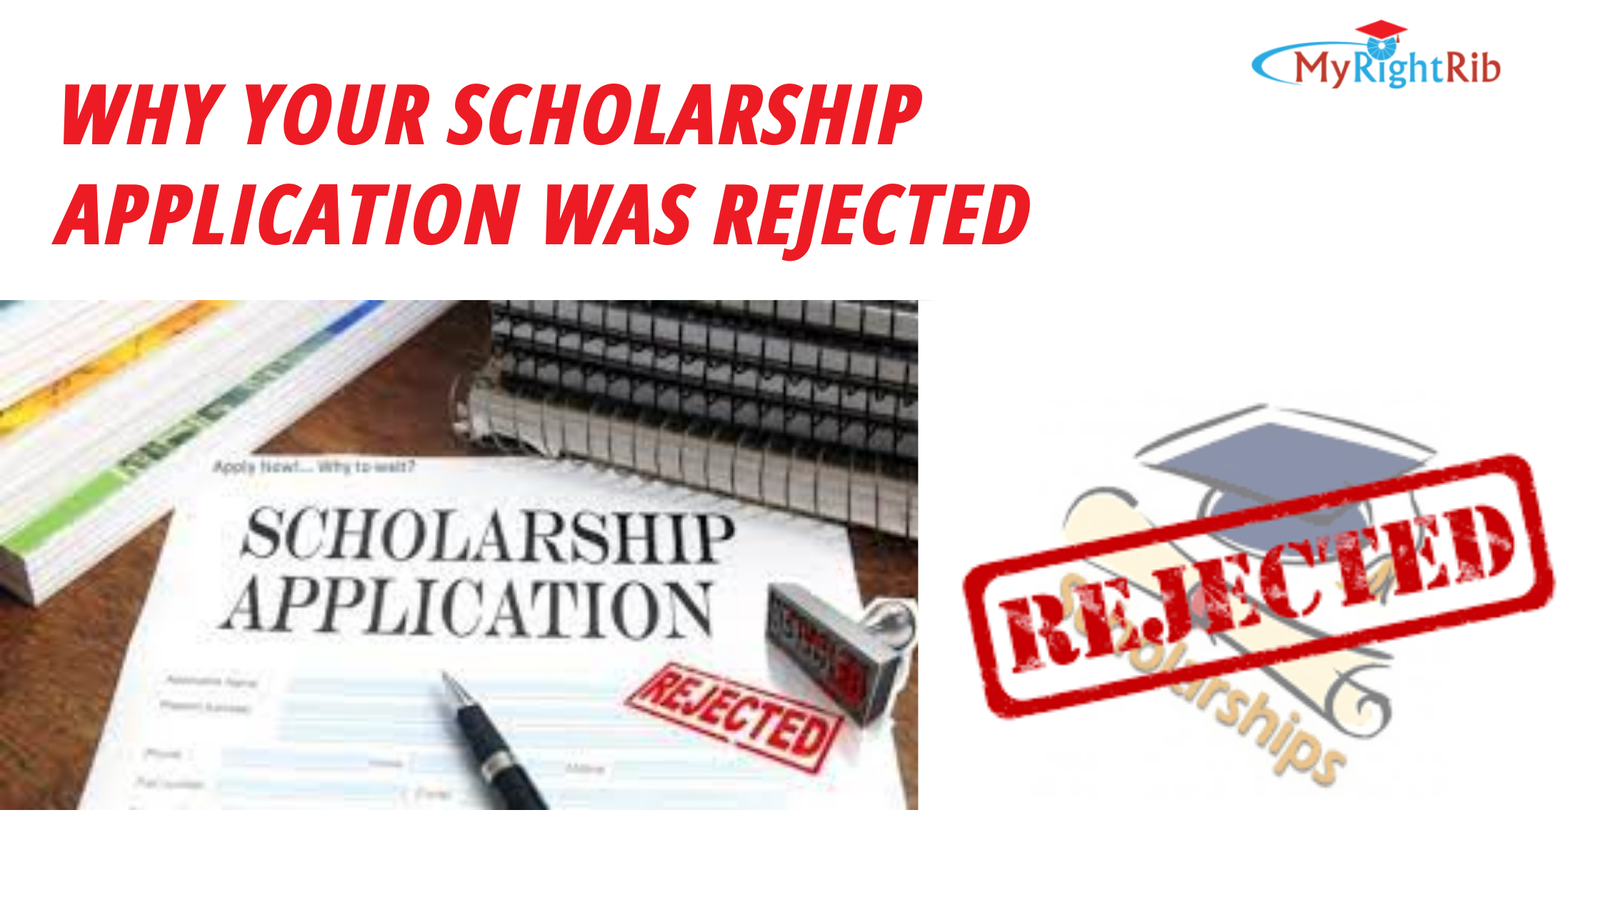 7 Reasons Why Your Scholarship Application Was Rejected